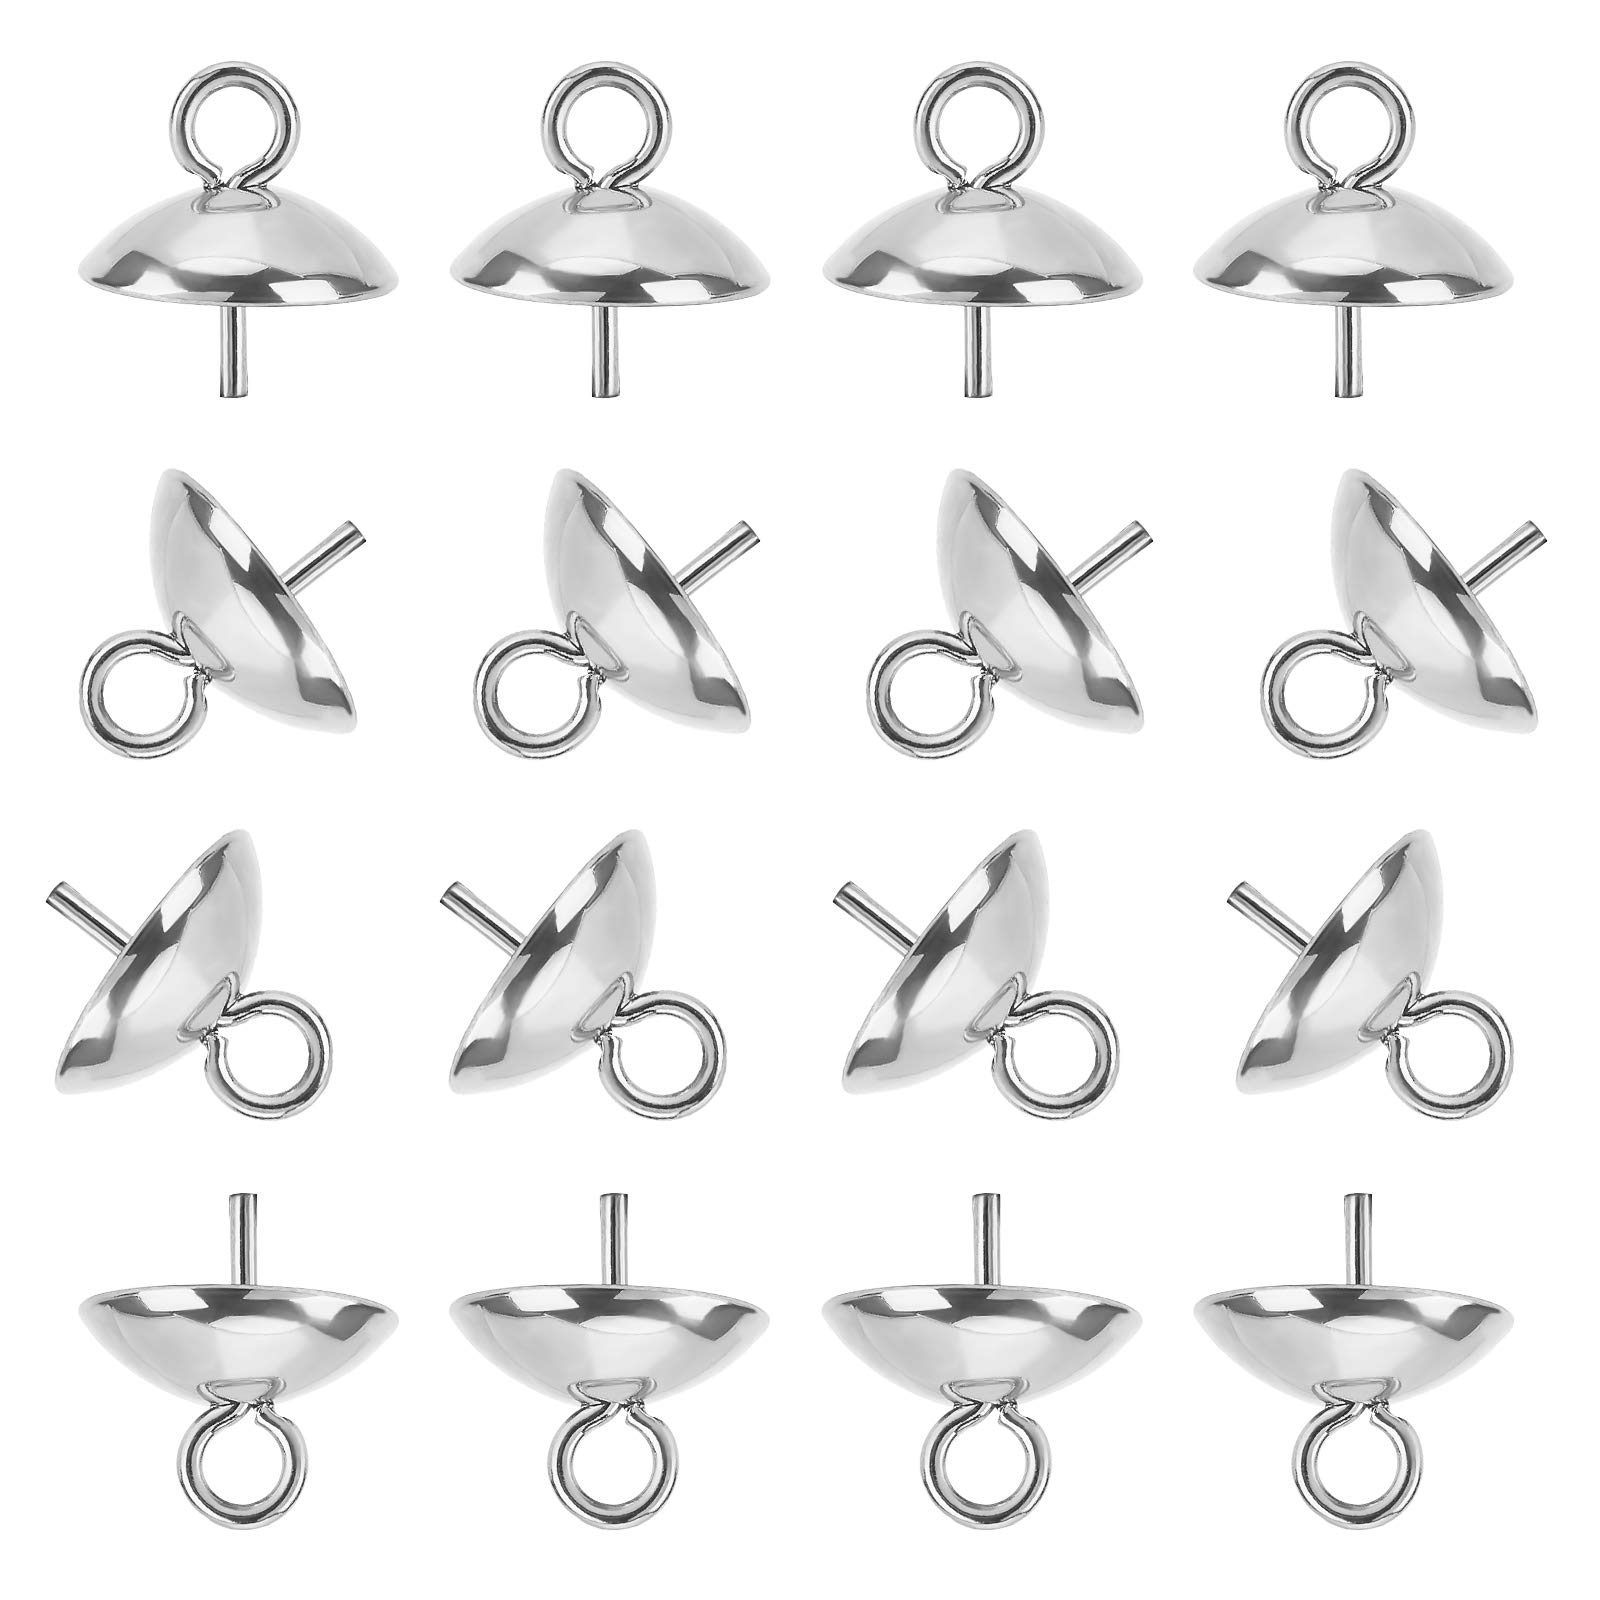 60pcs 2 Colors S-Hook Necklace Clasp 304 Stainless Steel Chain